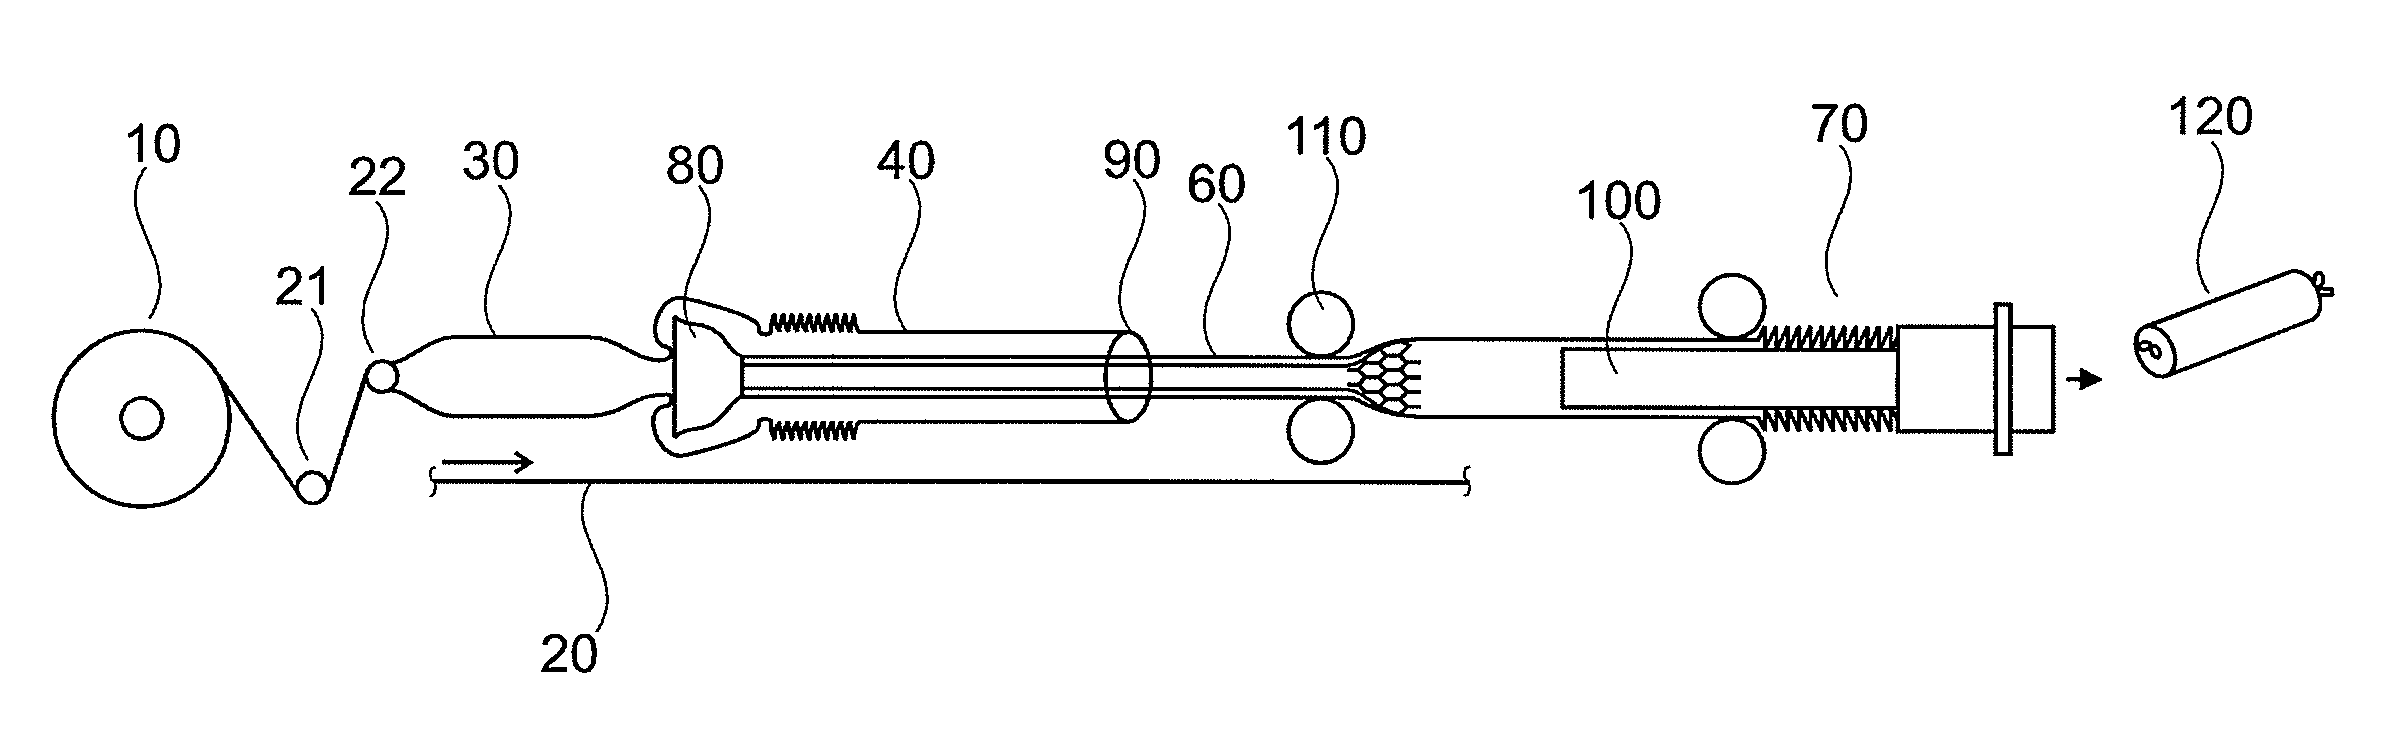 Method for producing a netted casing